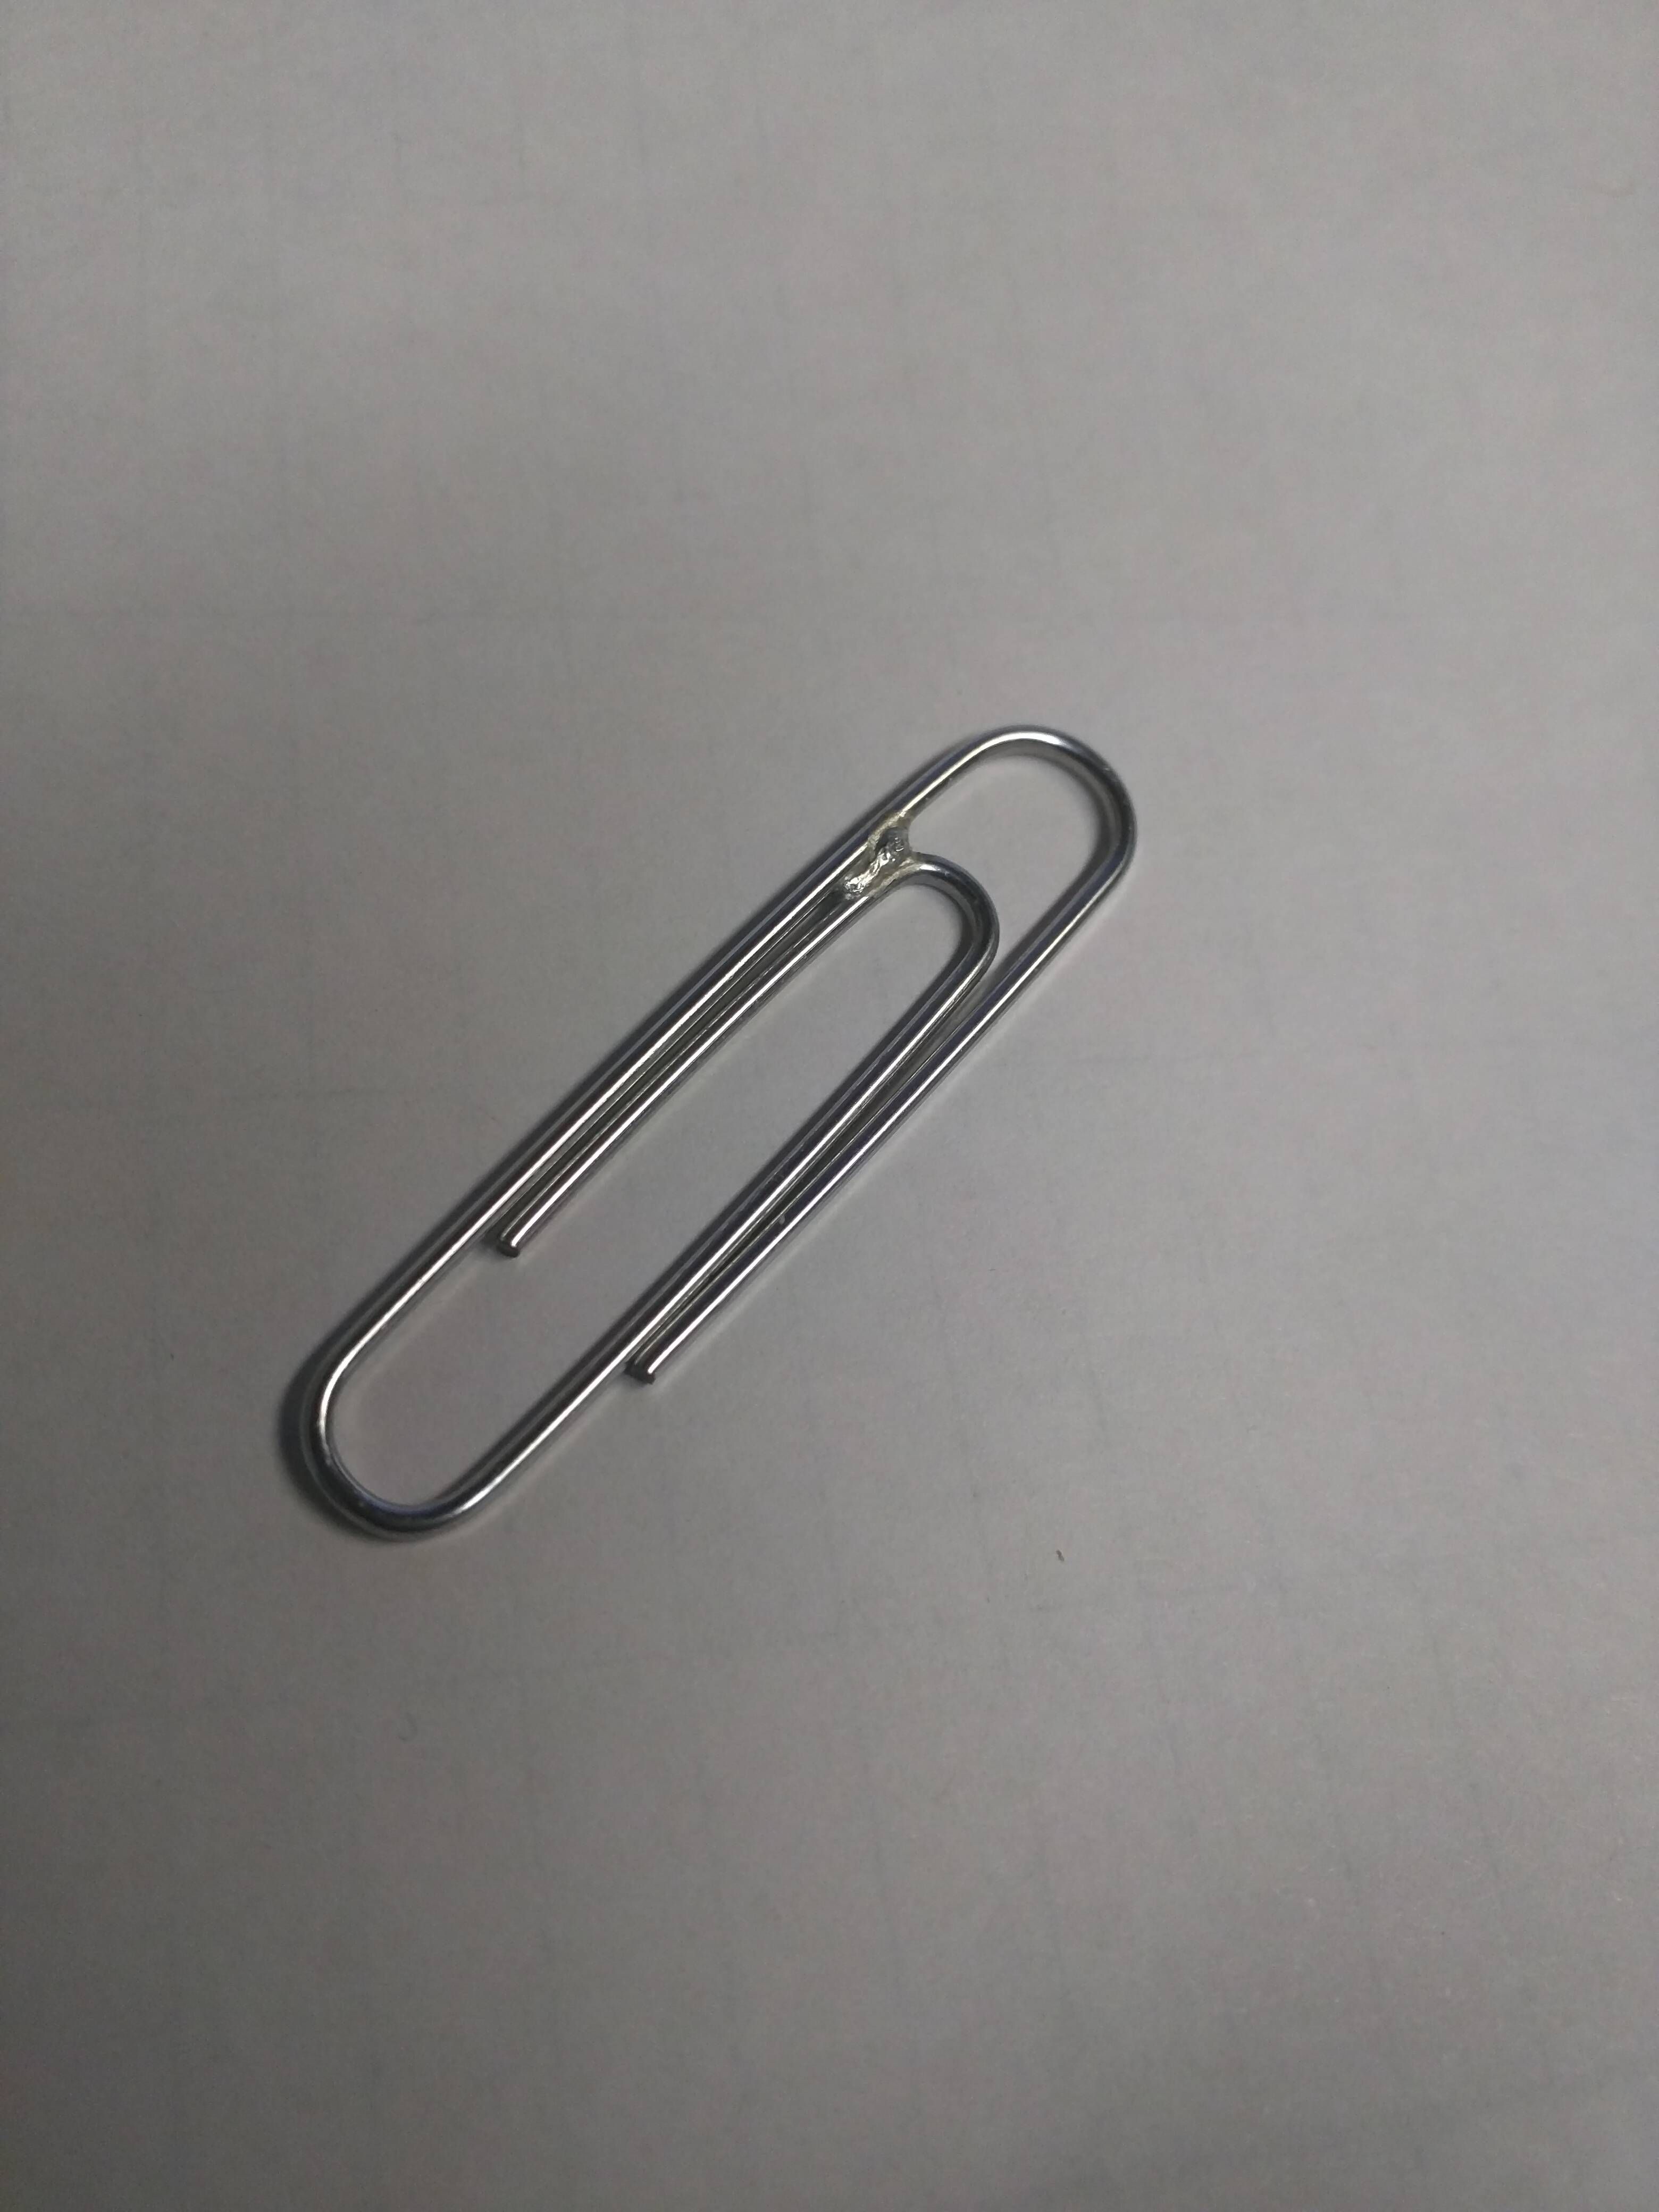 I like to solder paperclips and leave them around the office.